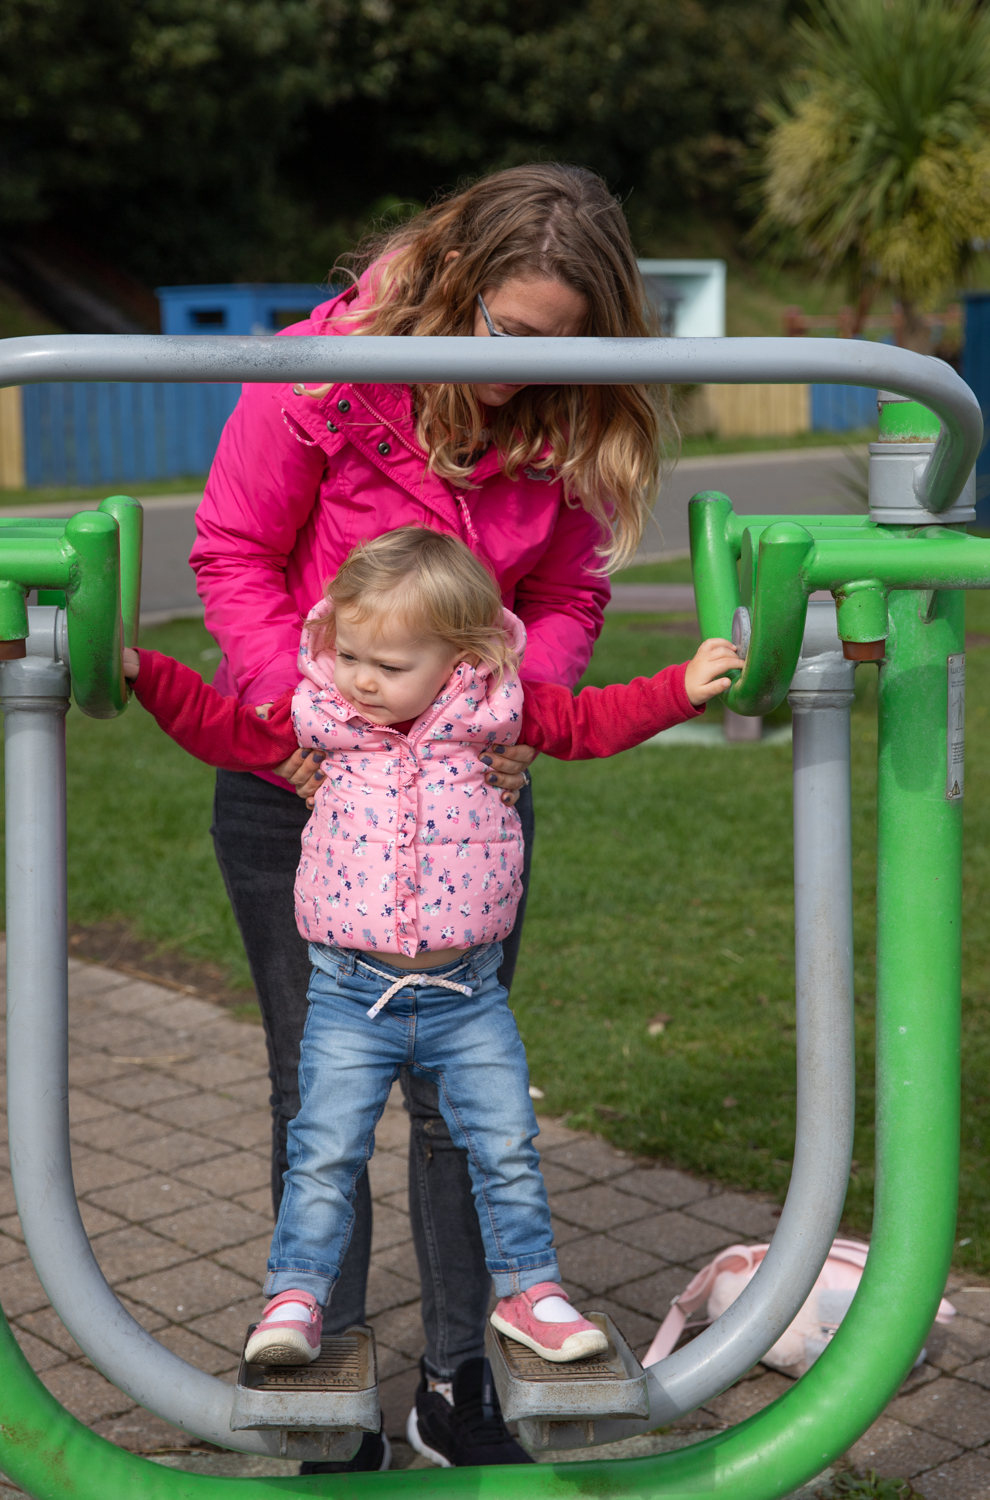 Claire helping Sienna play on a exercise machine at the Park